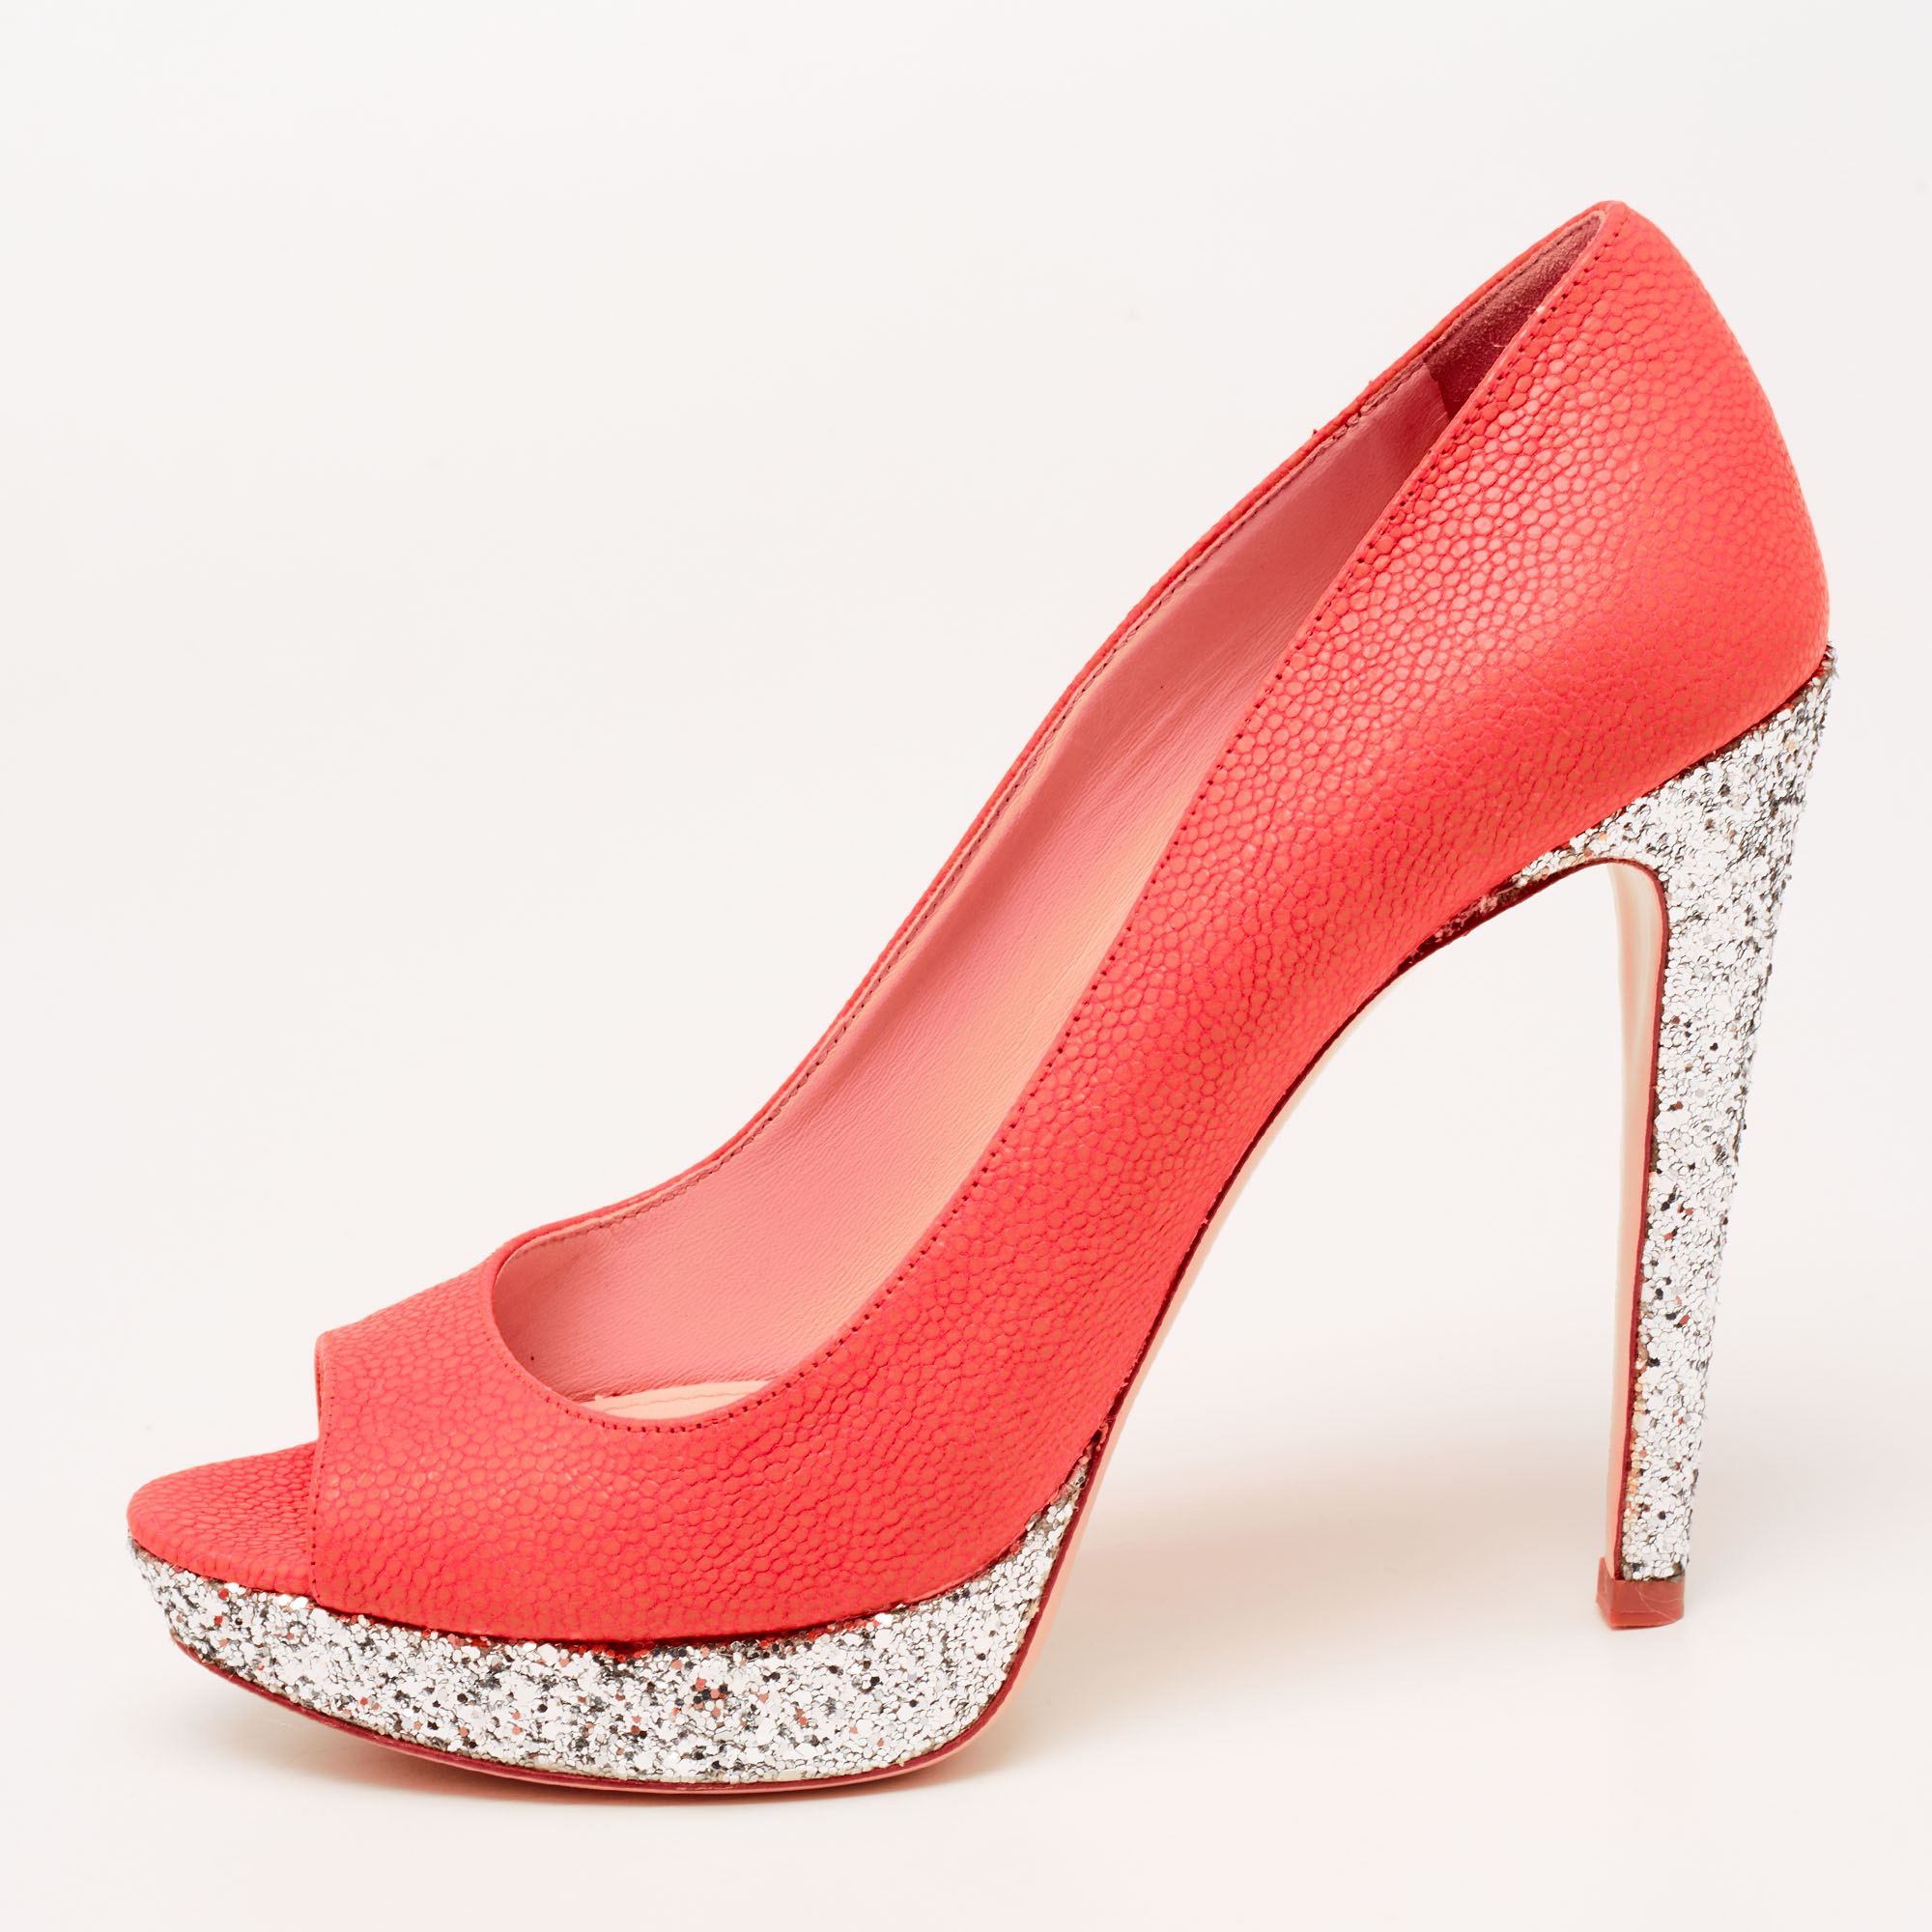 Pre-owned Miu Miu Neon Pink Leather And Glitter Peep Toe Platform Pumps Size 38.5